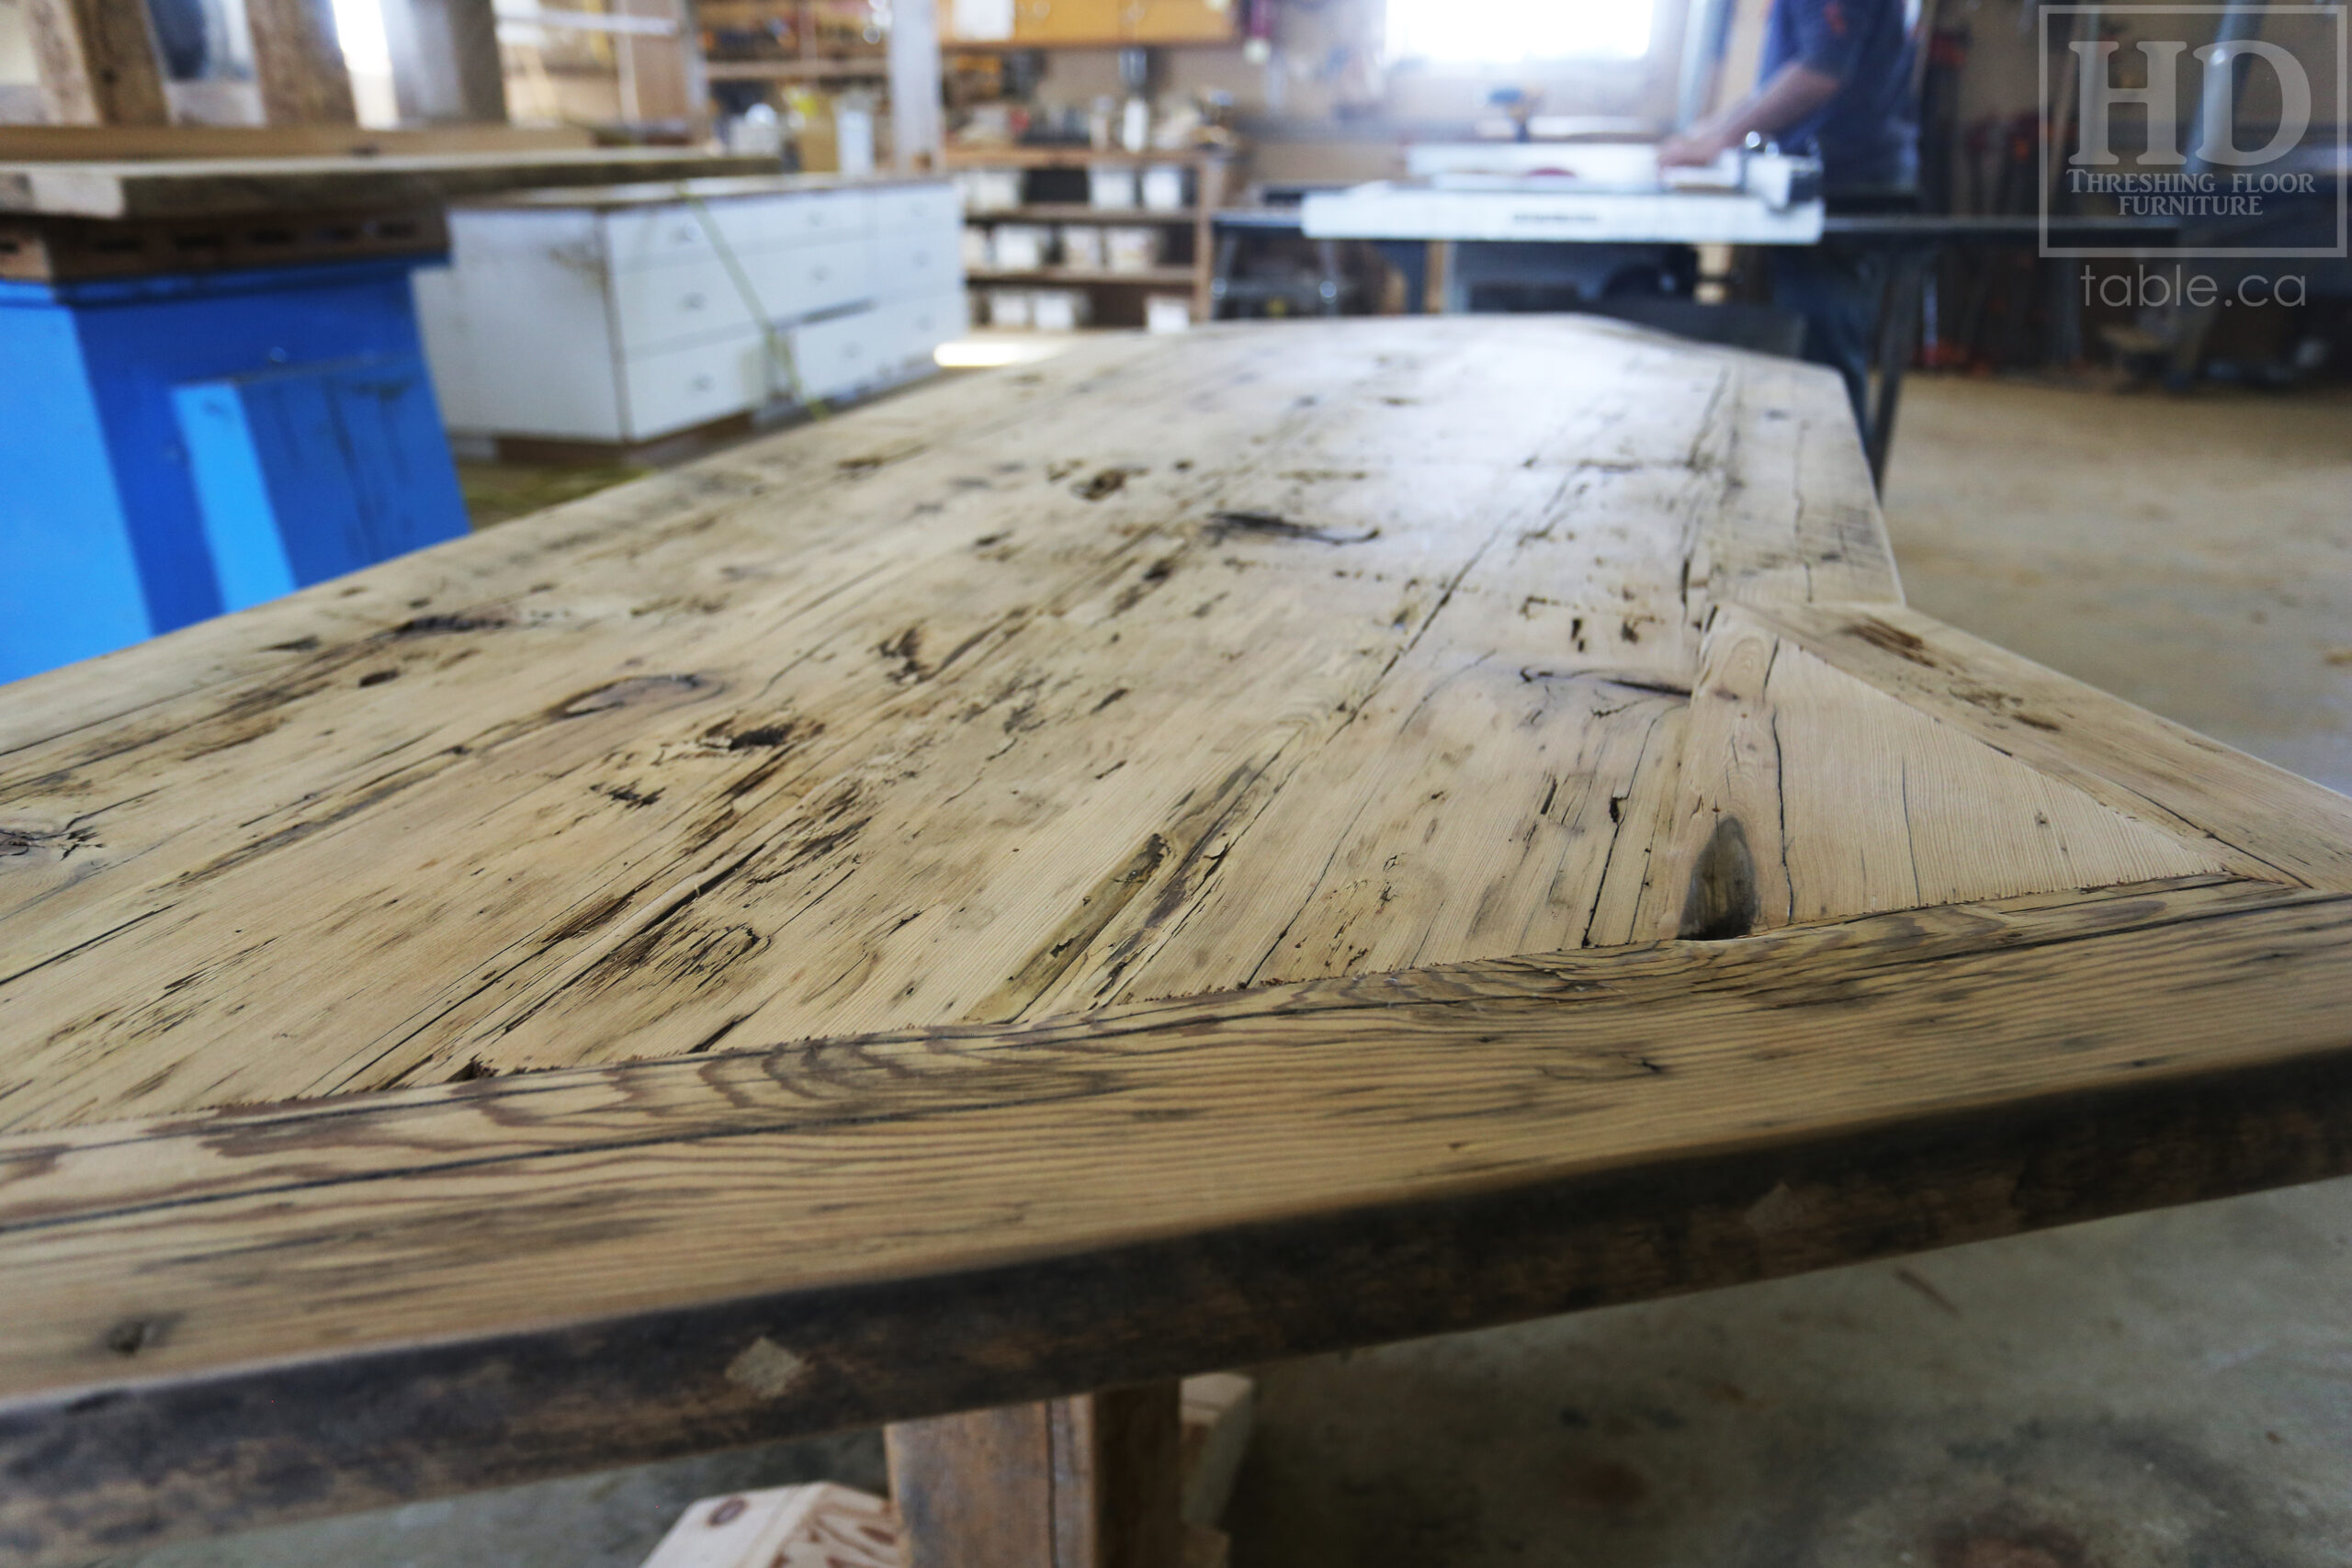 Custom Ontario Barnwood Desk – Barn Beam Posts – Modified Shape to Accommodate a Unique Space - Reclaimed Hemlock Threshing Floor 2” Top – Original edges & distressing maintained  – www.table.ca